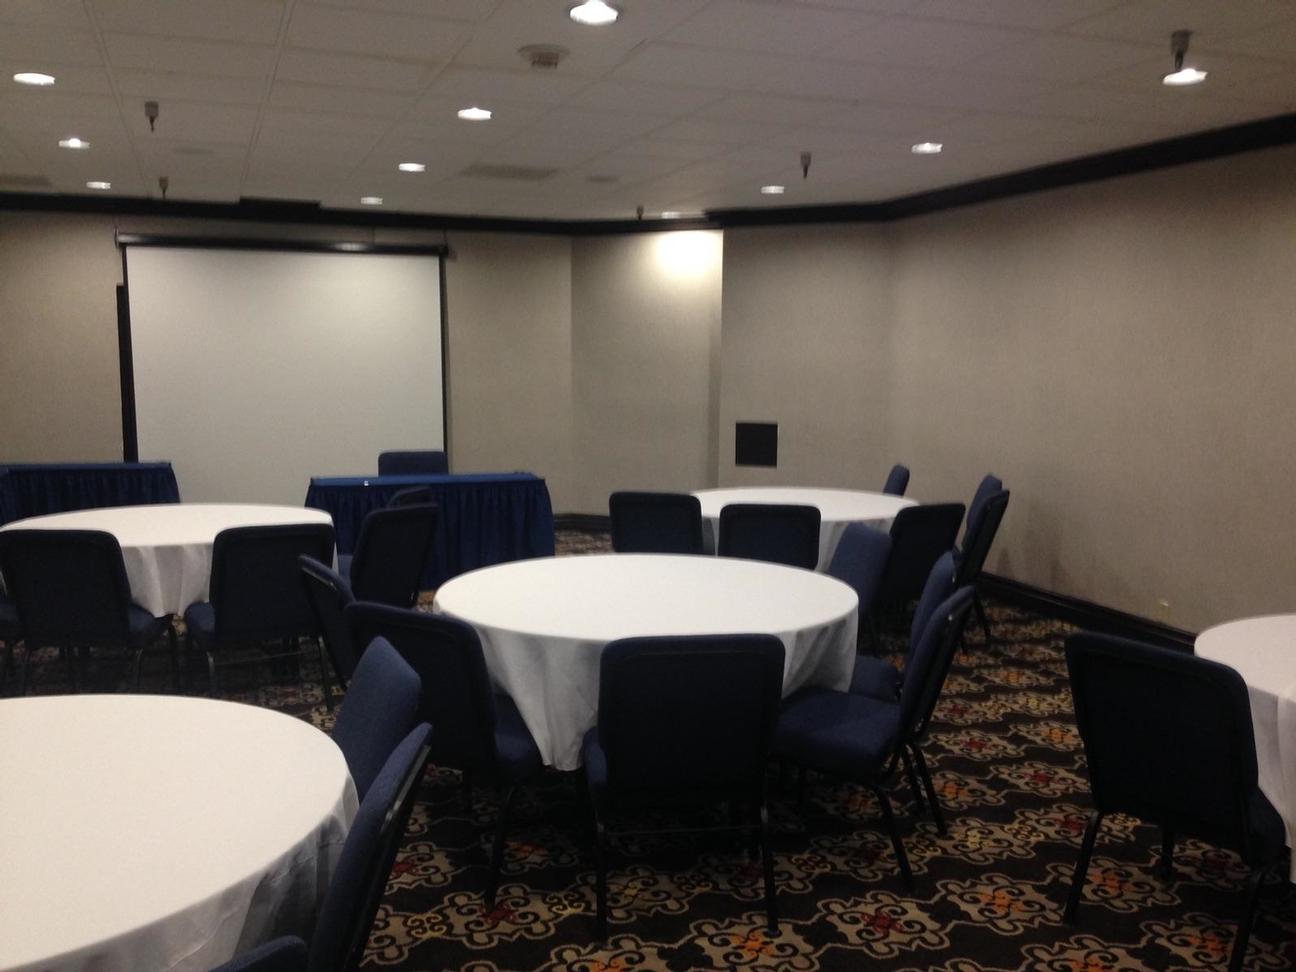 Photo of Meeting Room 3,15,16, or 17